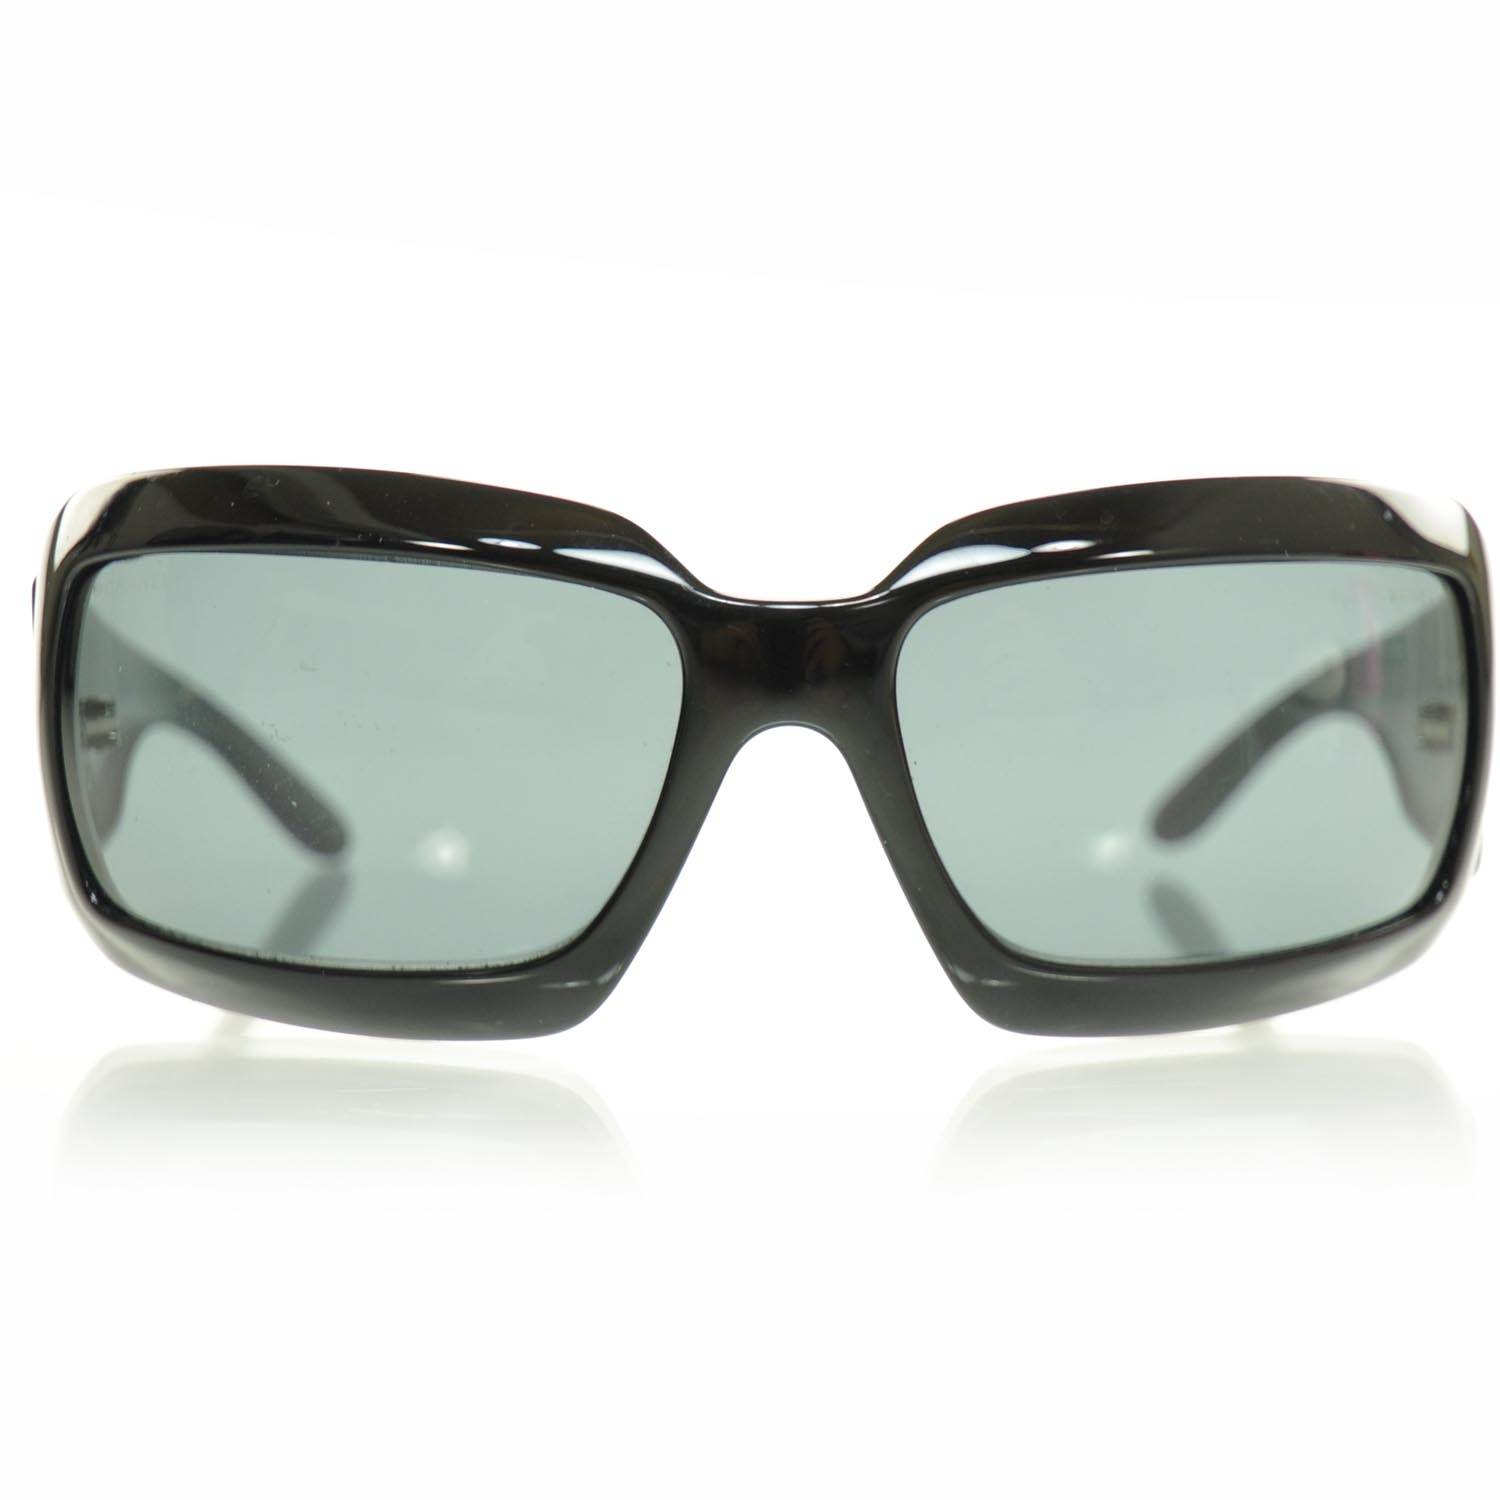 CHANEL Mother of Pearl Sunglasses 5076 H Black 23563